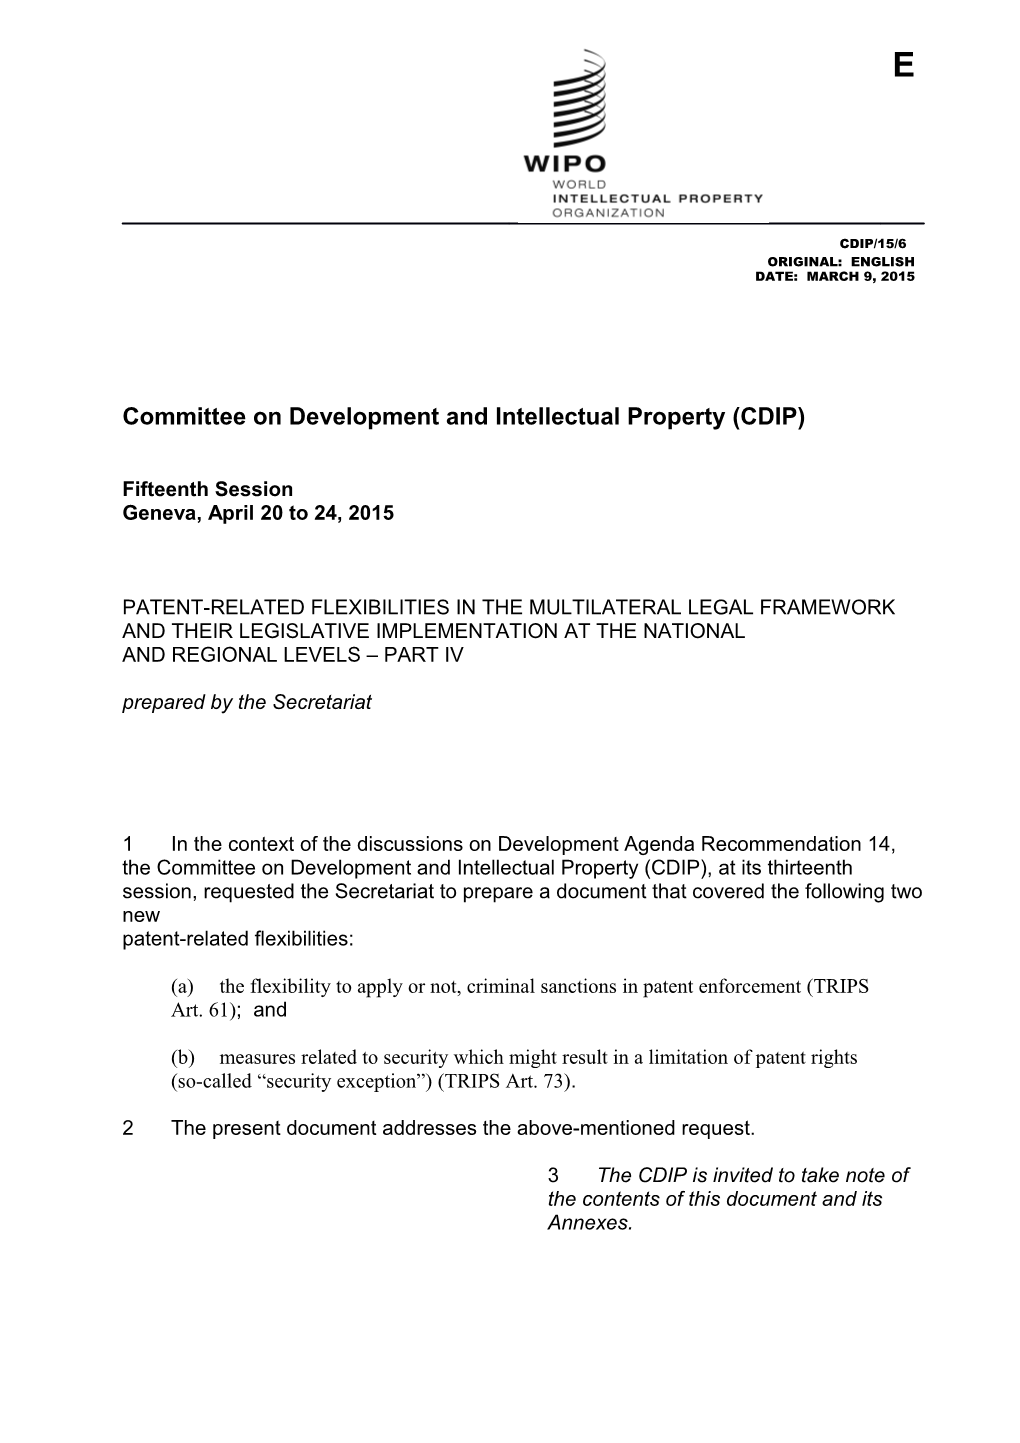 Committee on Development and Intellectual Property (CDIP) s5